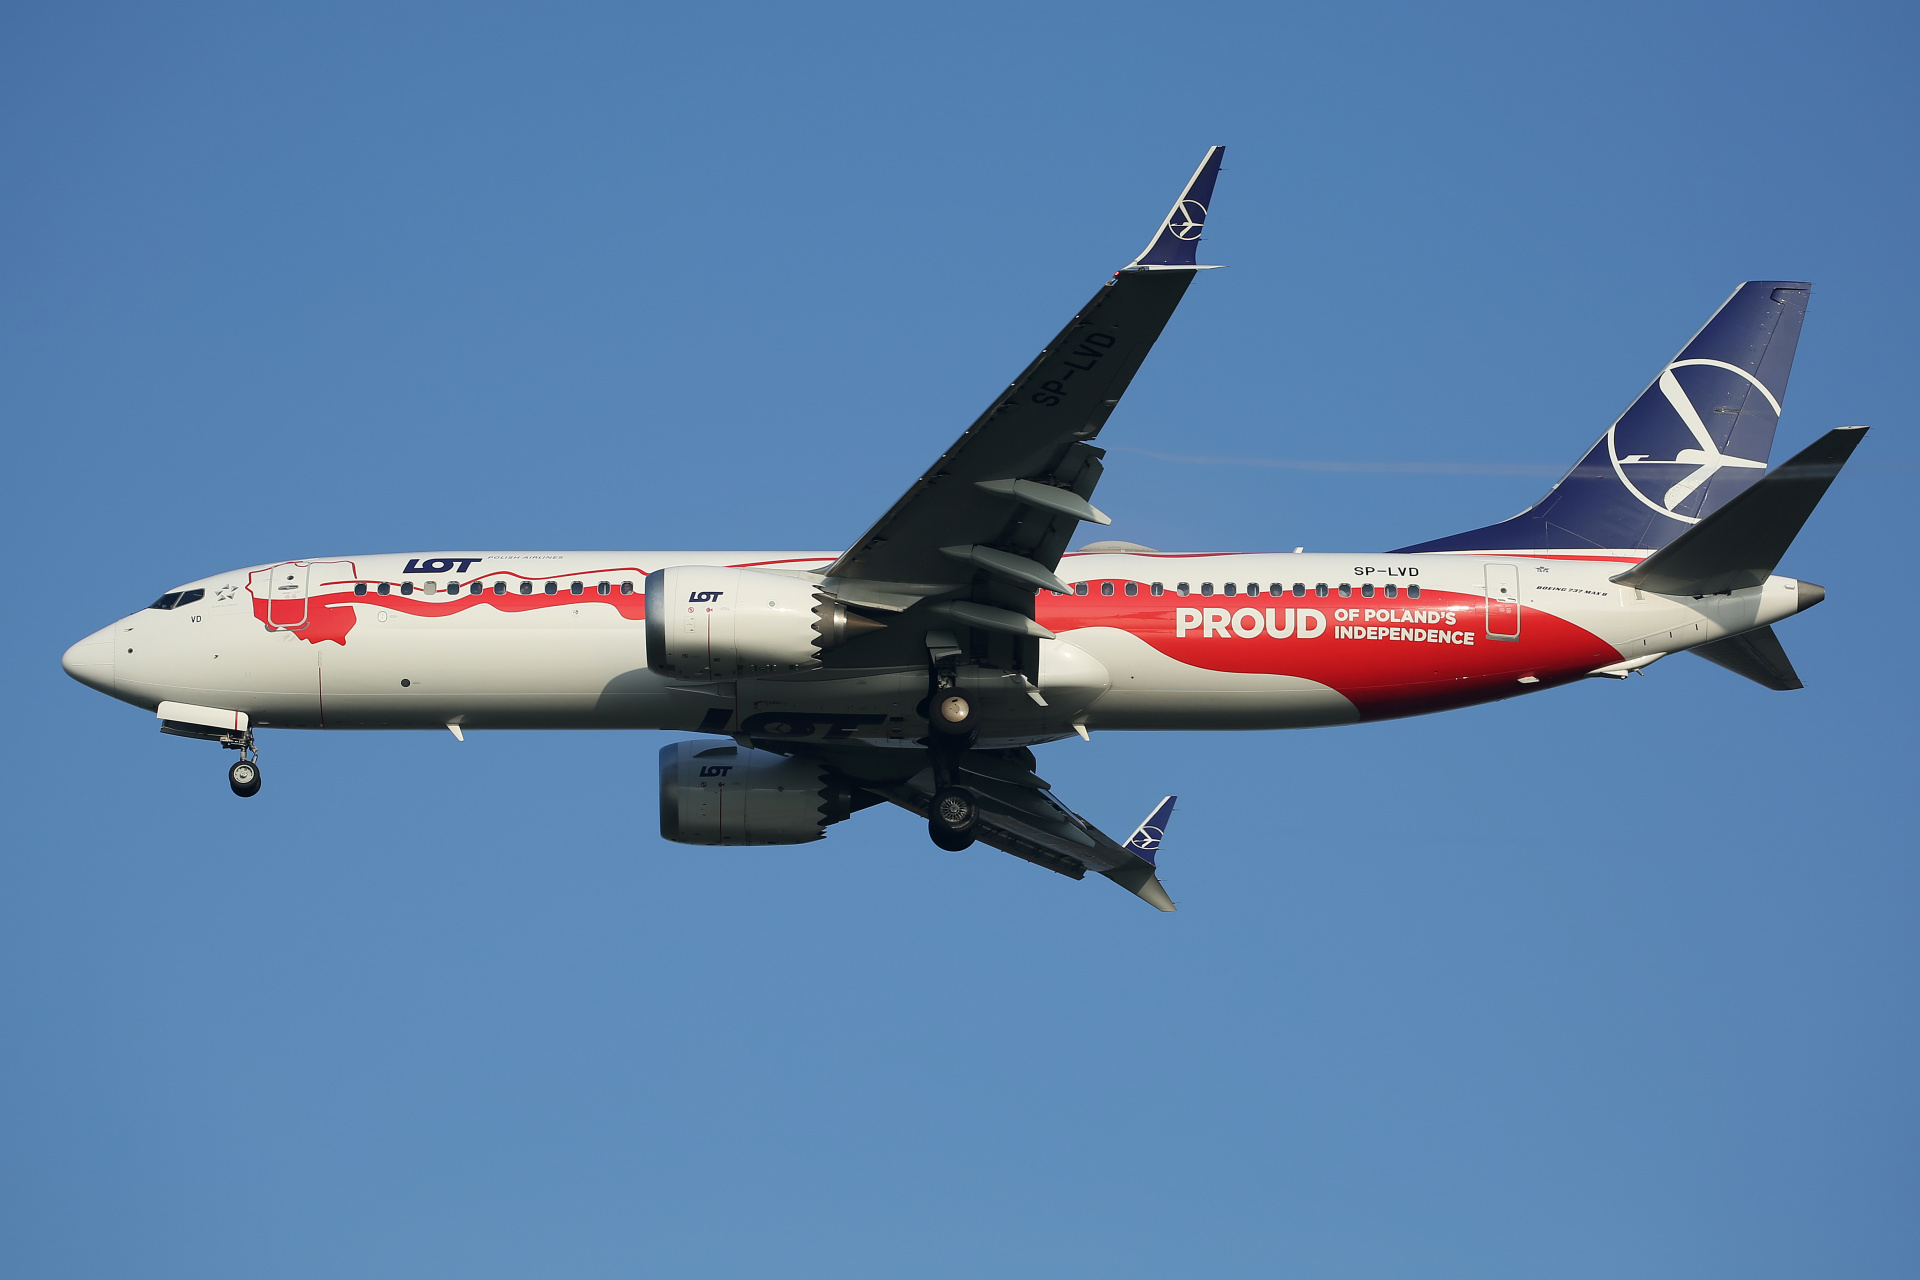 SP-LVD (Proud of Poland's Independence livery) (Aircraft » EPWA Spotting » Boeing 737-8 MAX » LOT Polish Airlines)